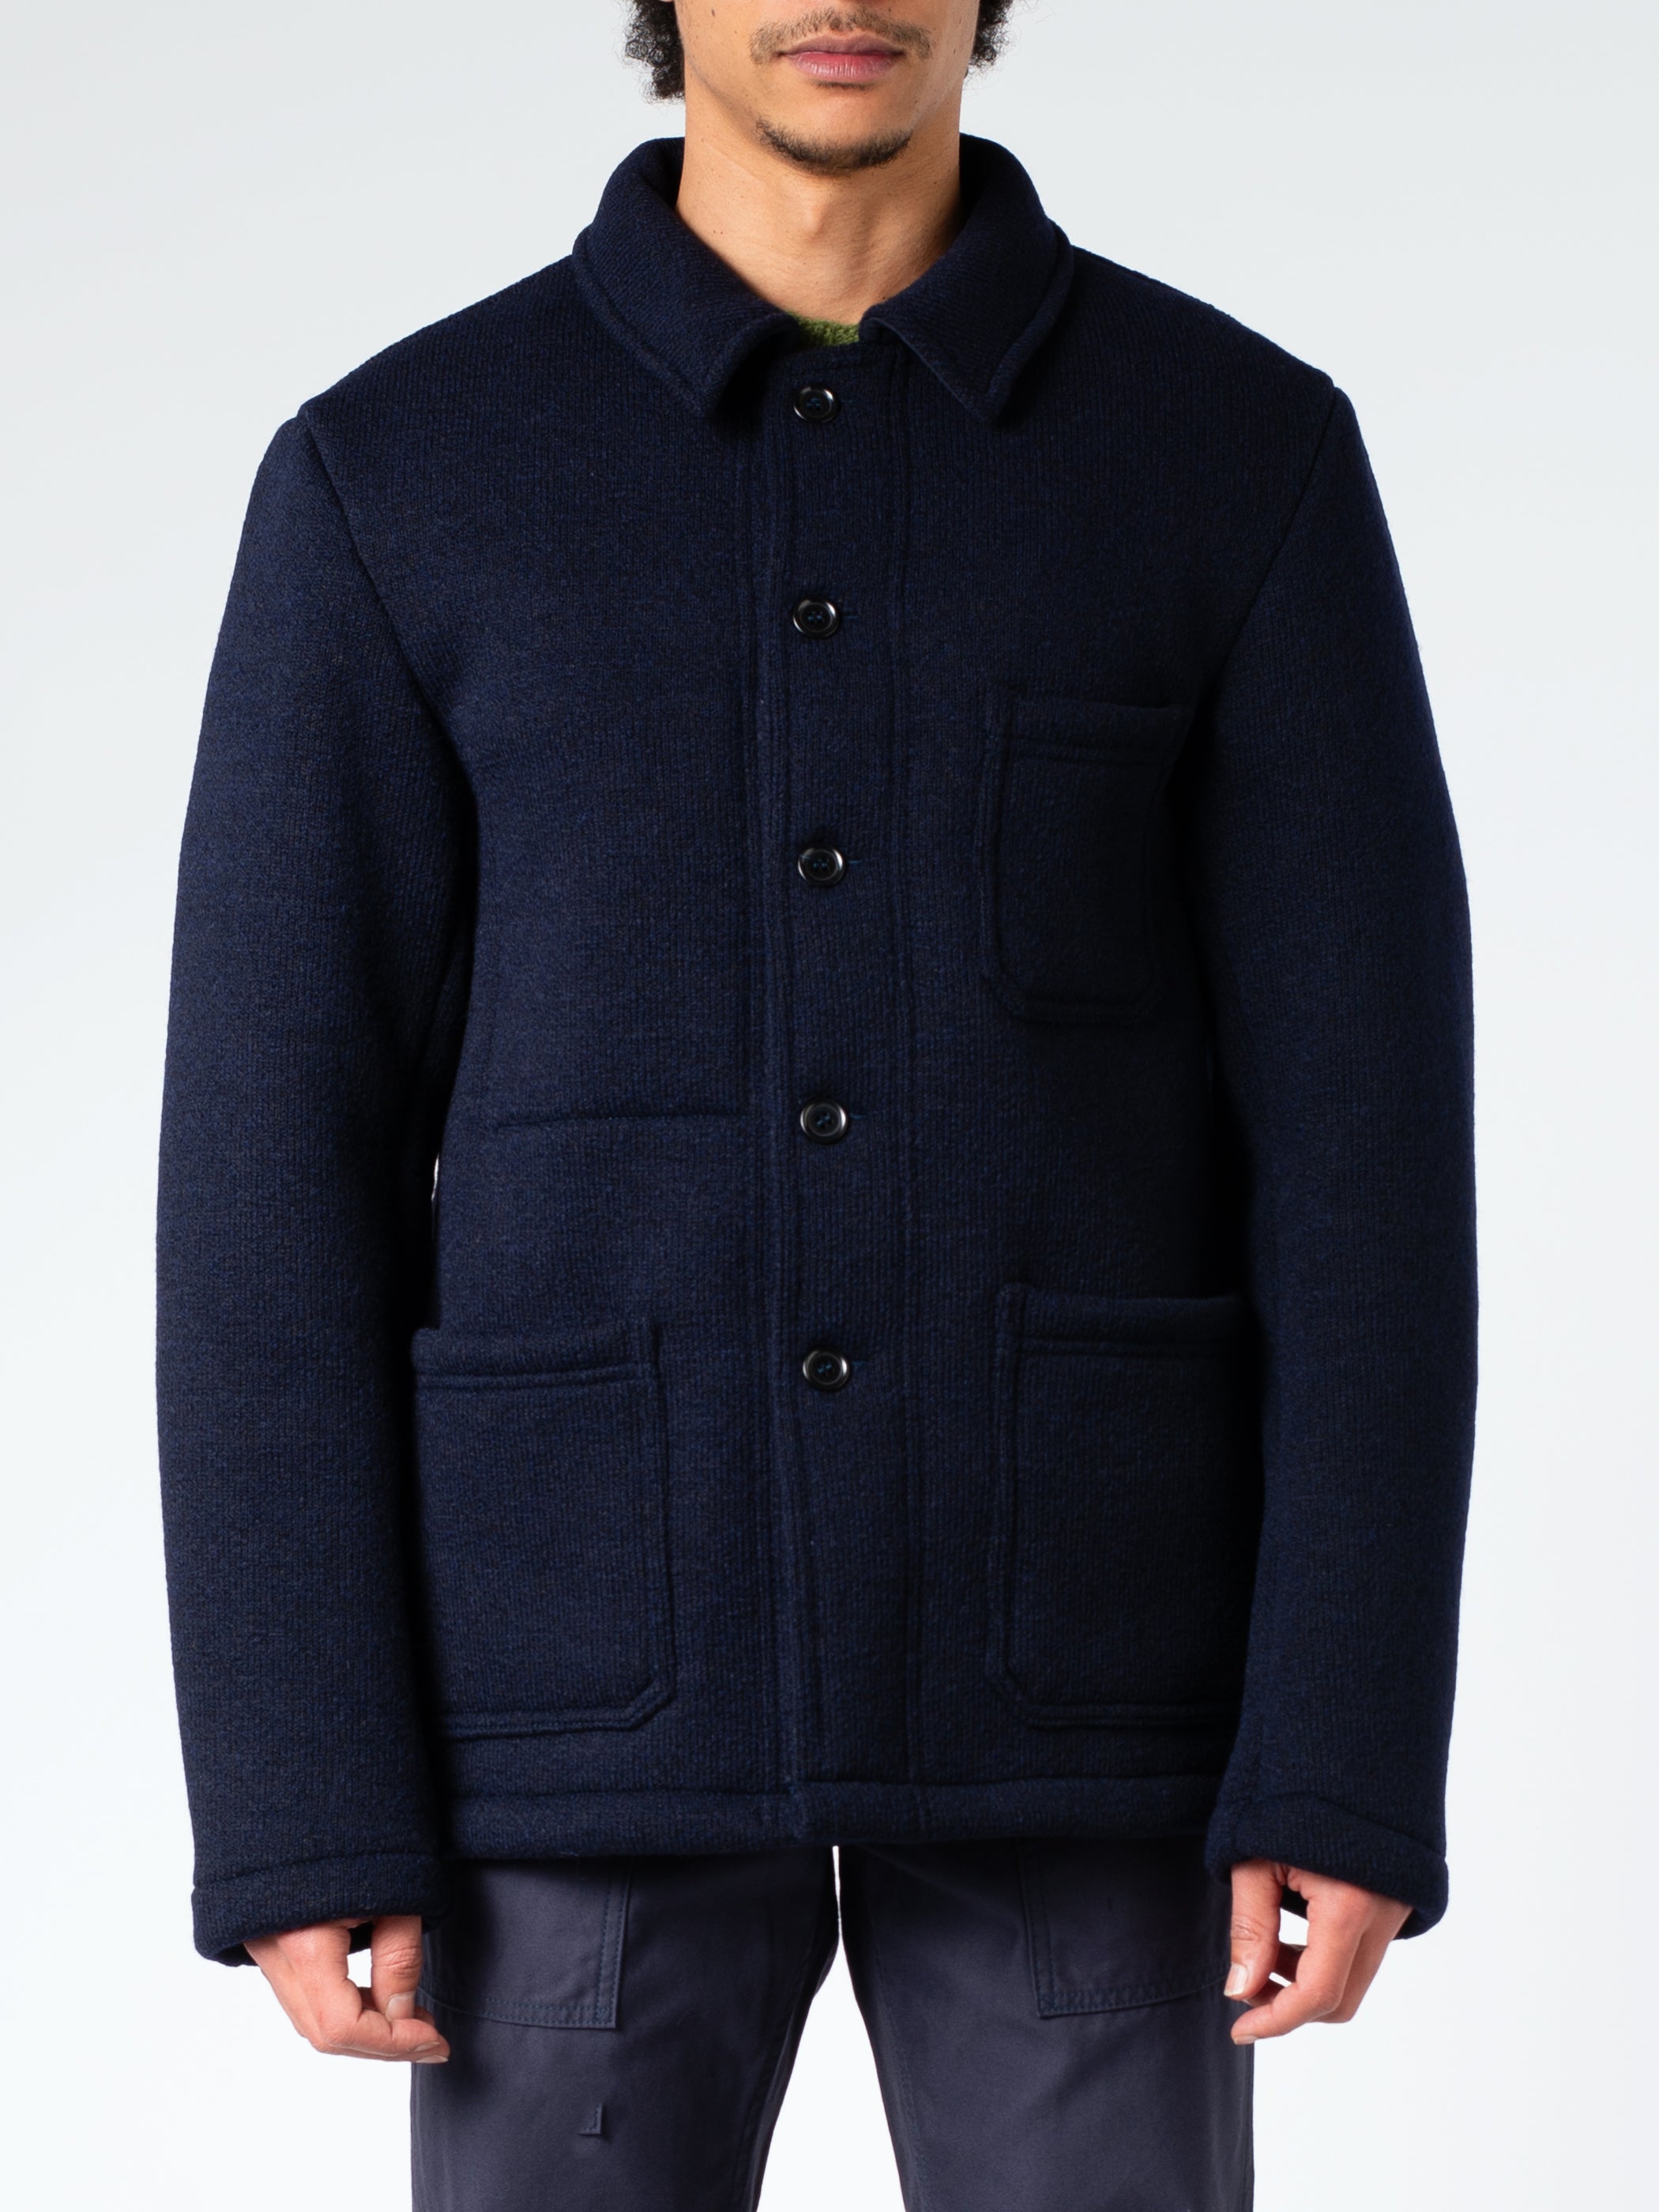 Thick Knitted Virgin Wool Melton Jacket